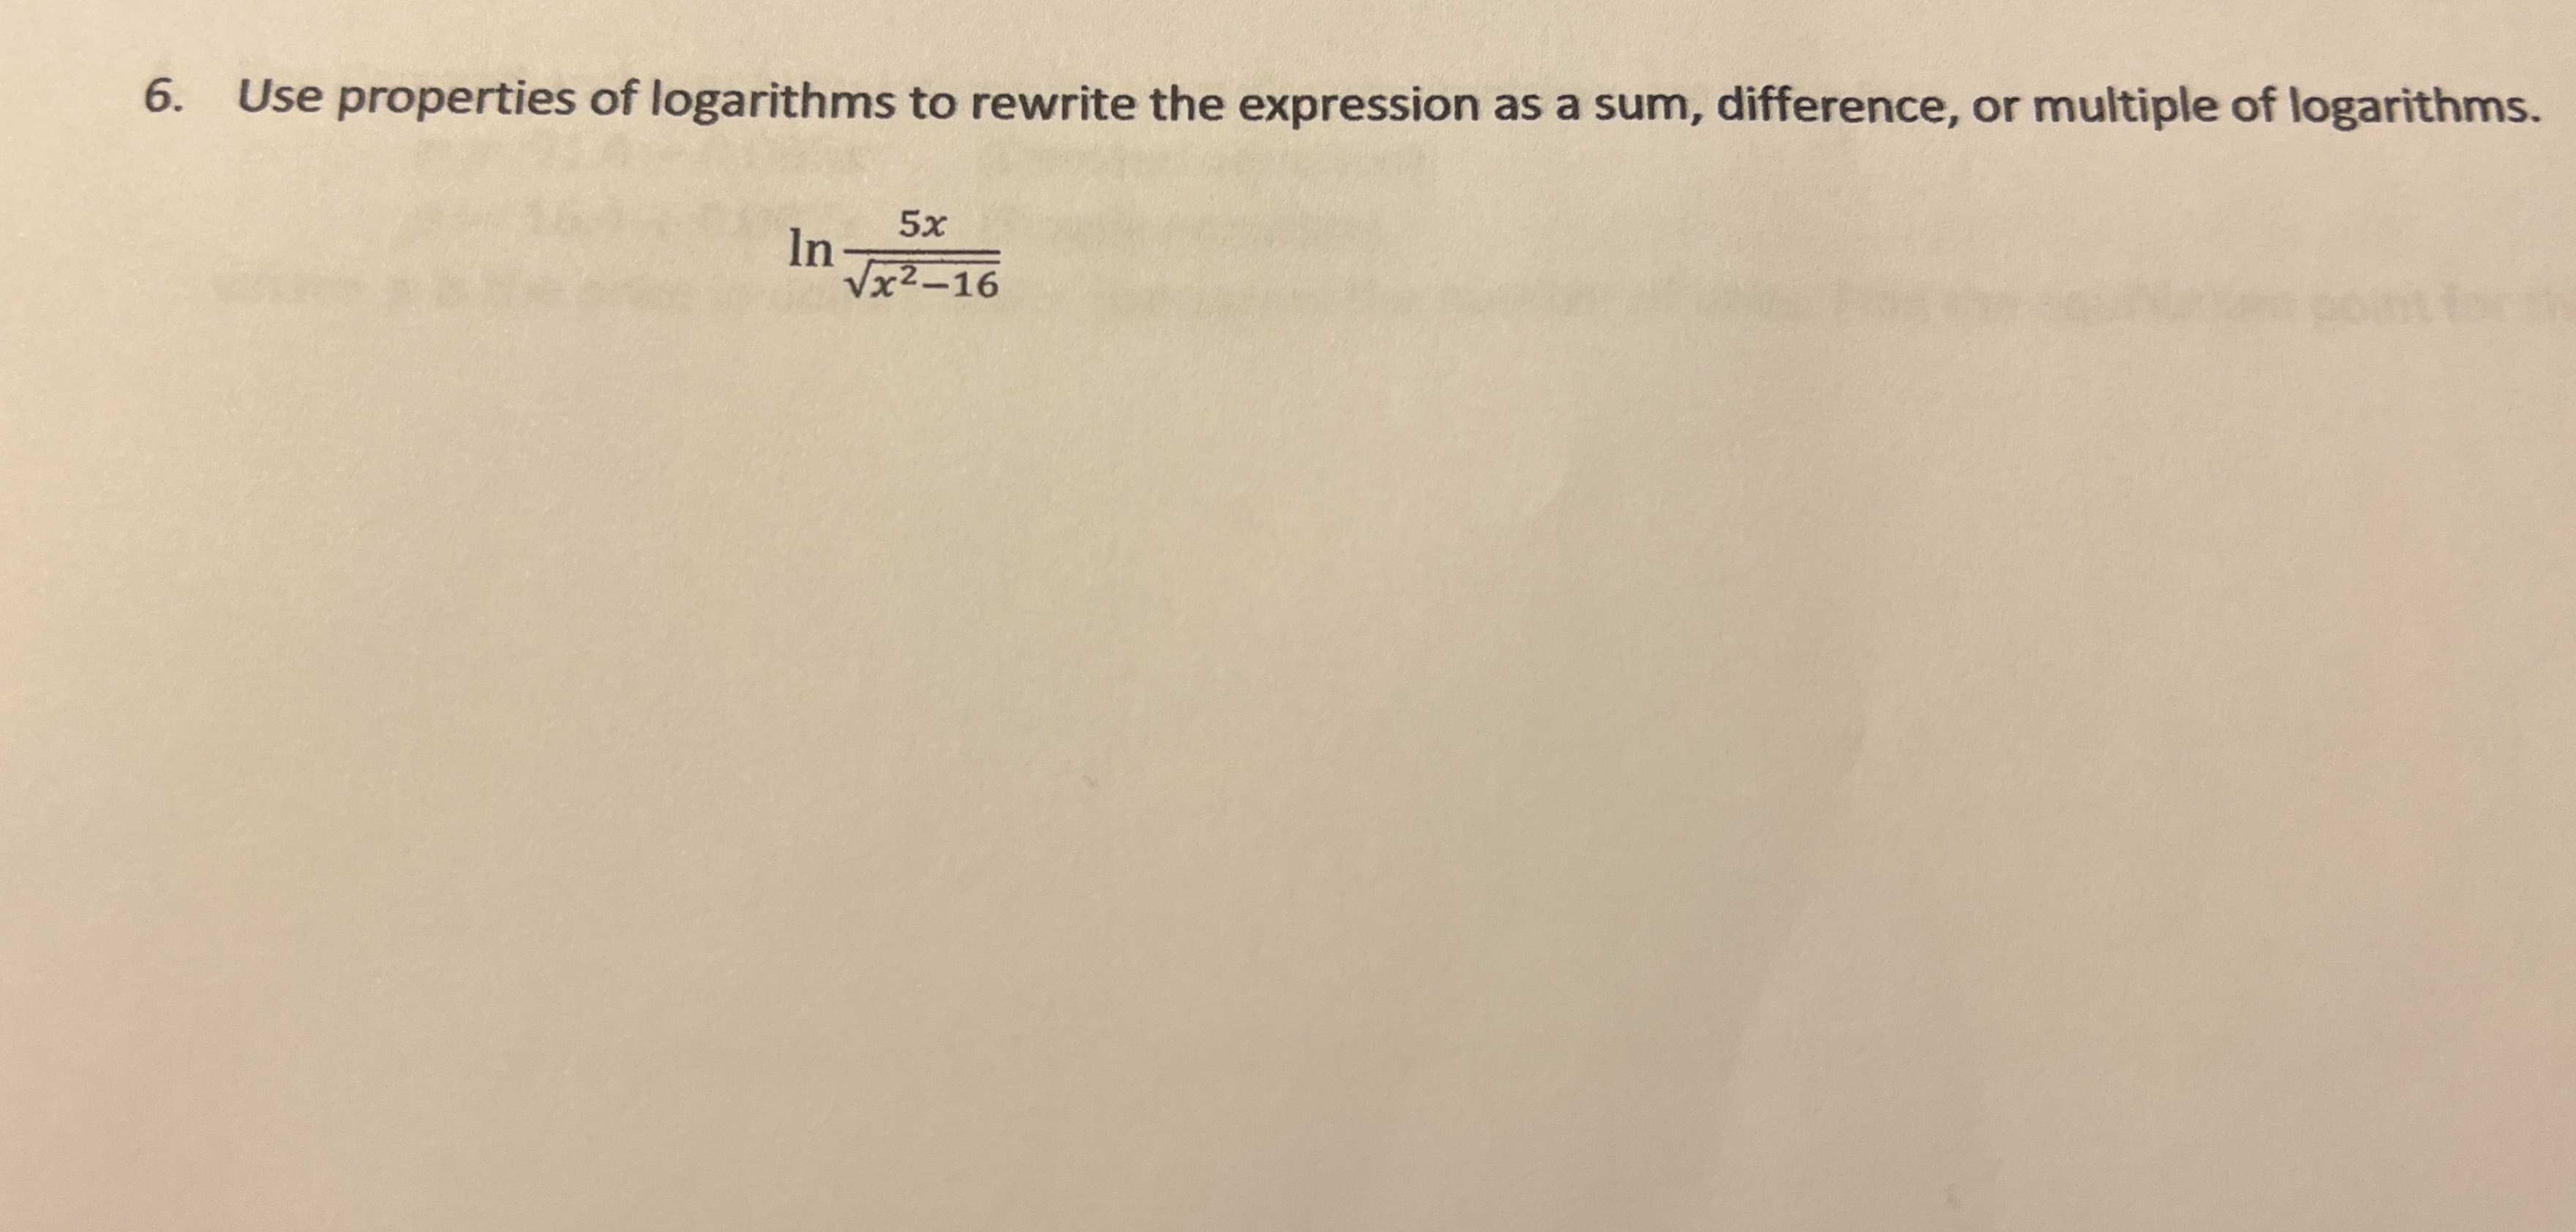 6. Use properties of logarithms to rewrite the exp...